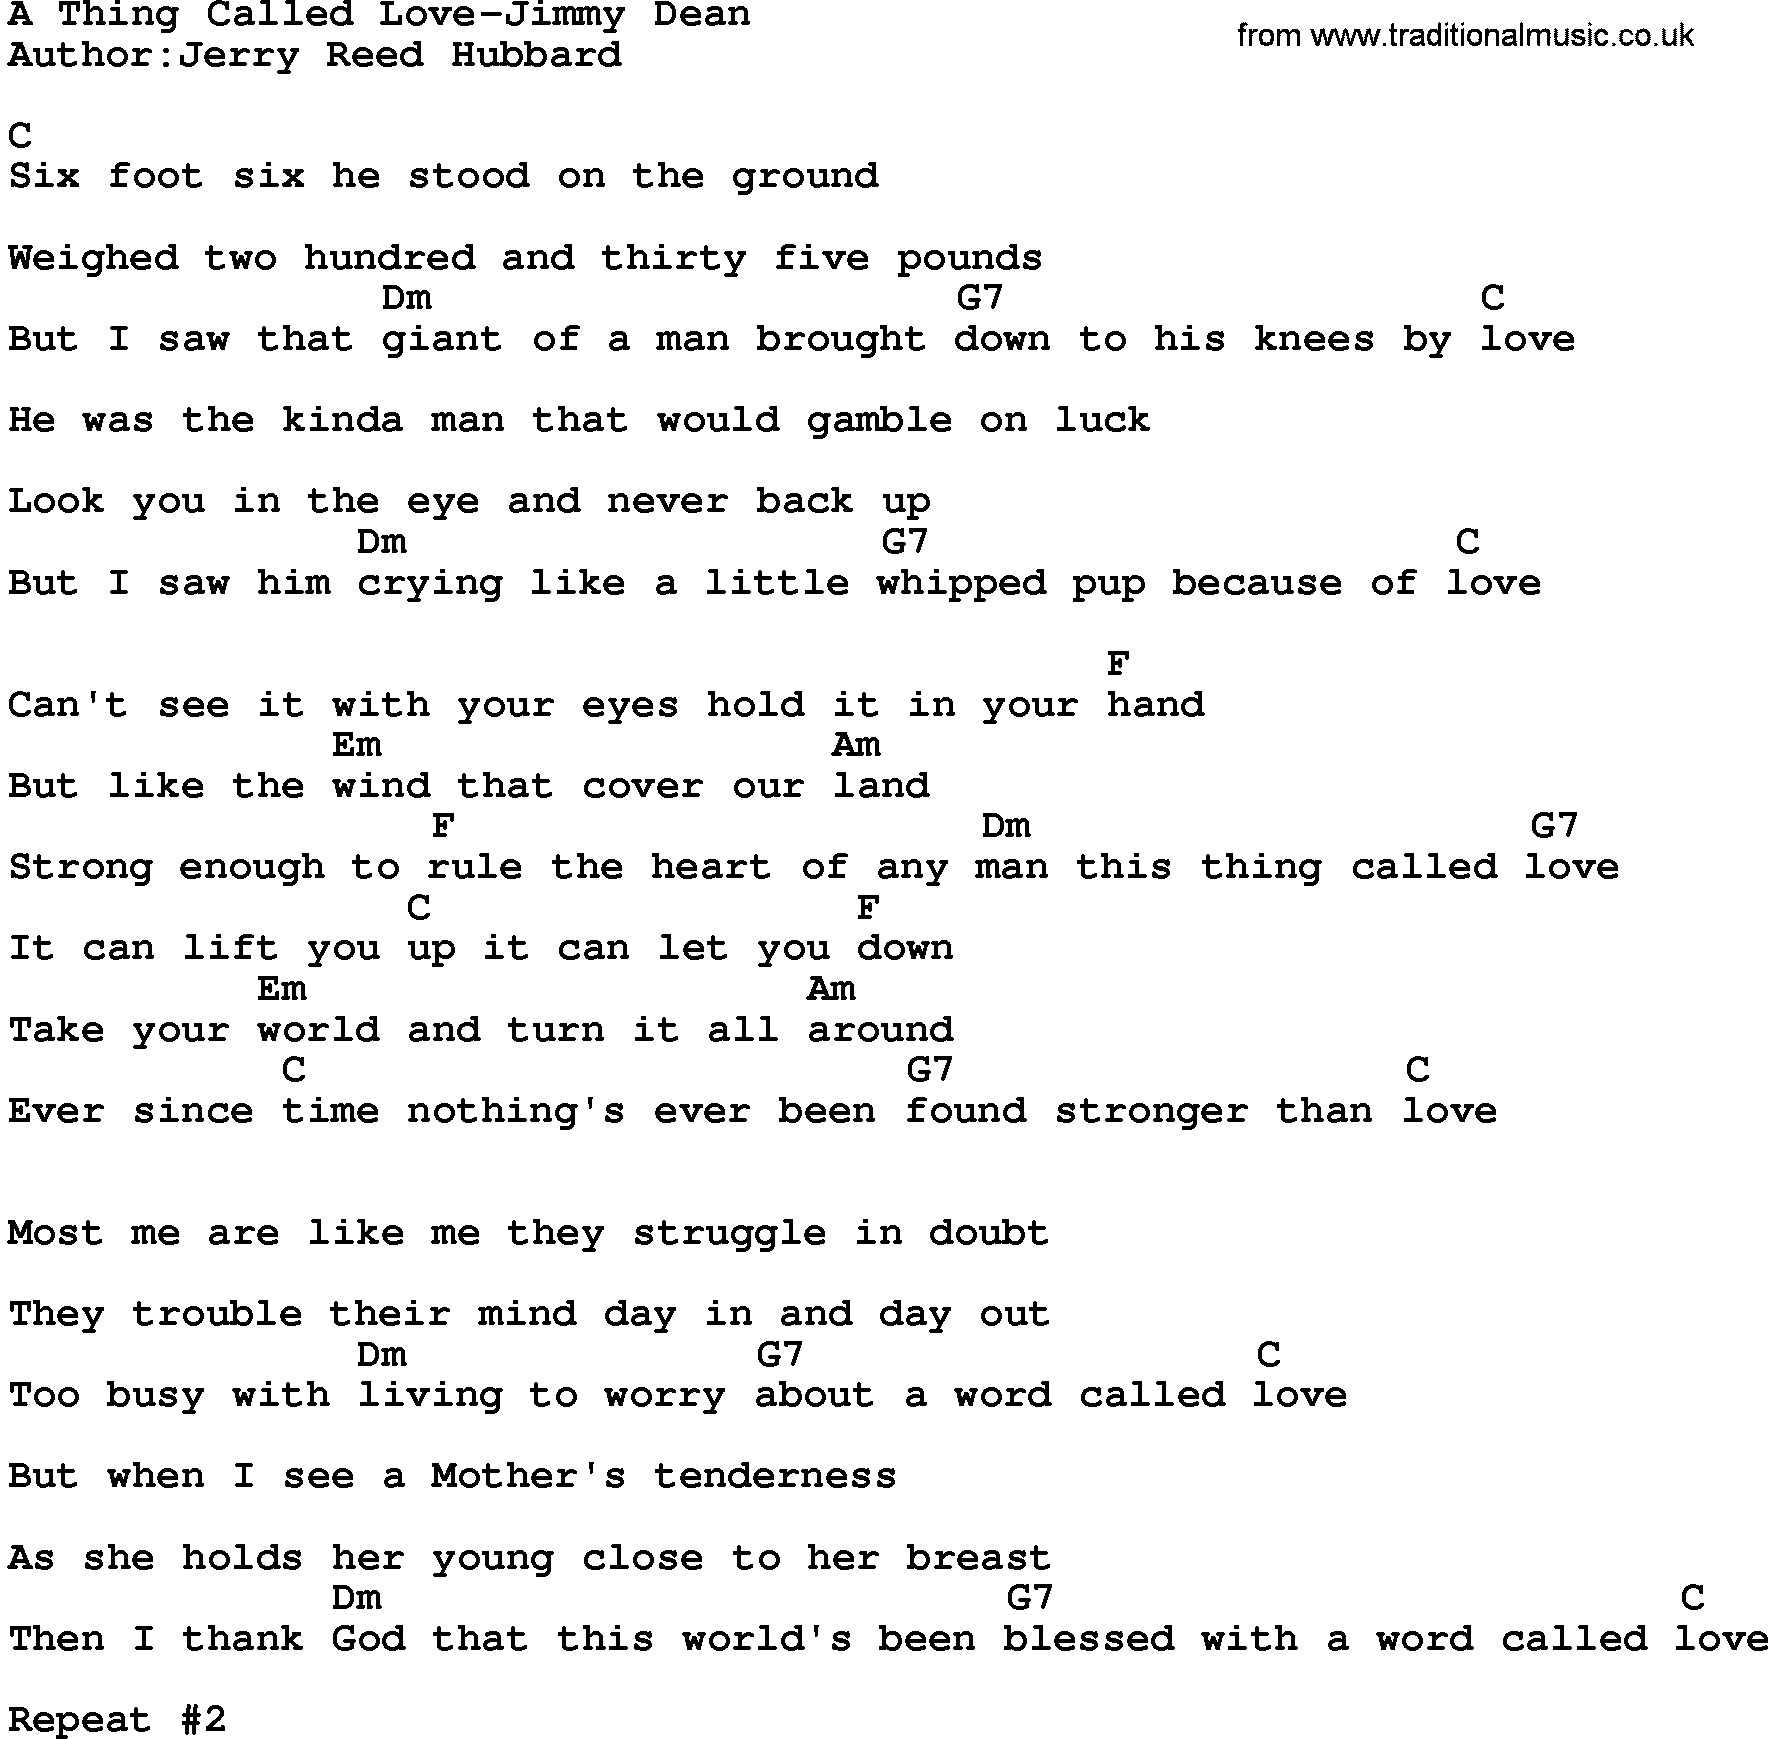 Country music song: A Thing Called Love-Jimmy Dean lyrics and chords